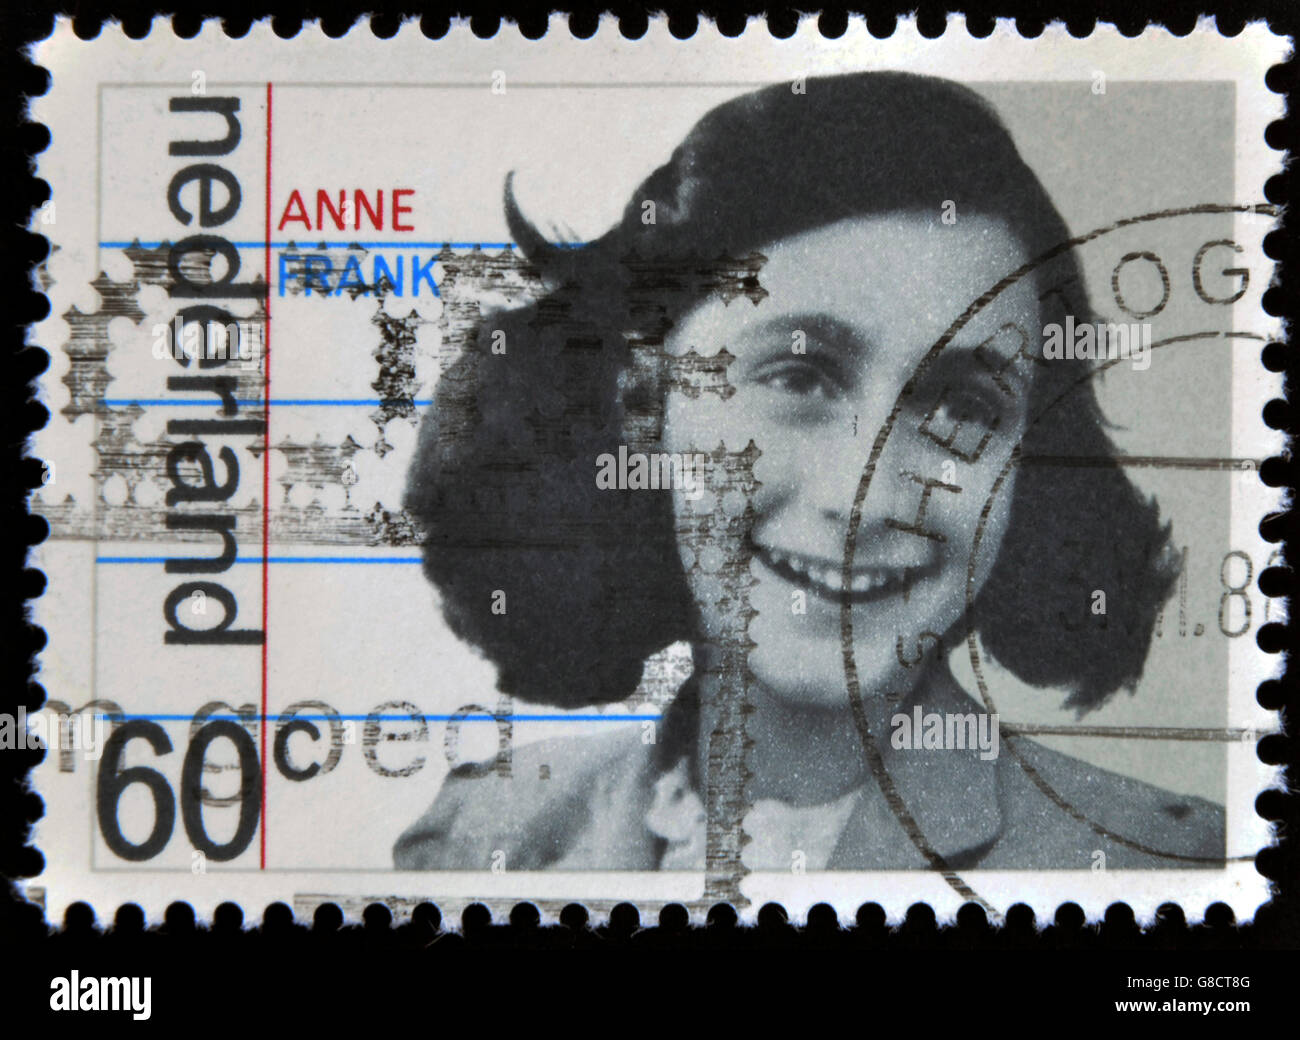 HOLLAND - CIRCA 1980: A stamp printed in The Netherlands shows image of Anne Frank, circa 1980 Stock Photo